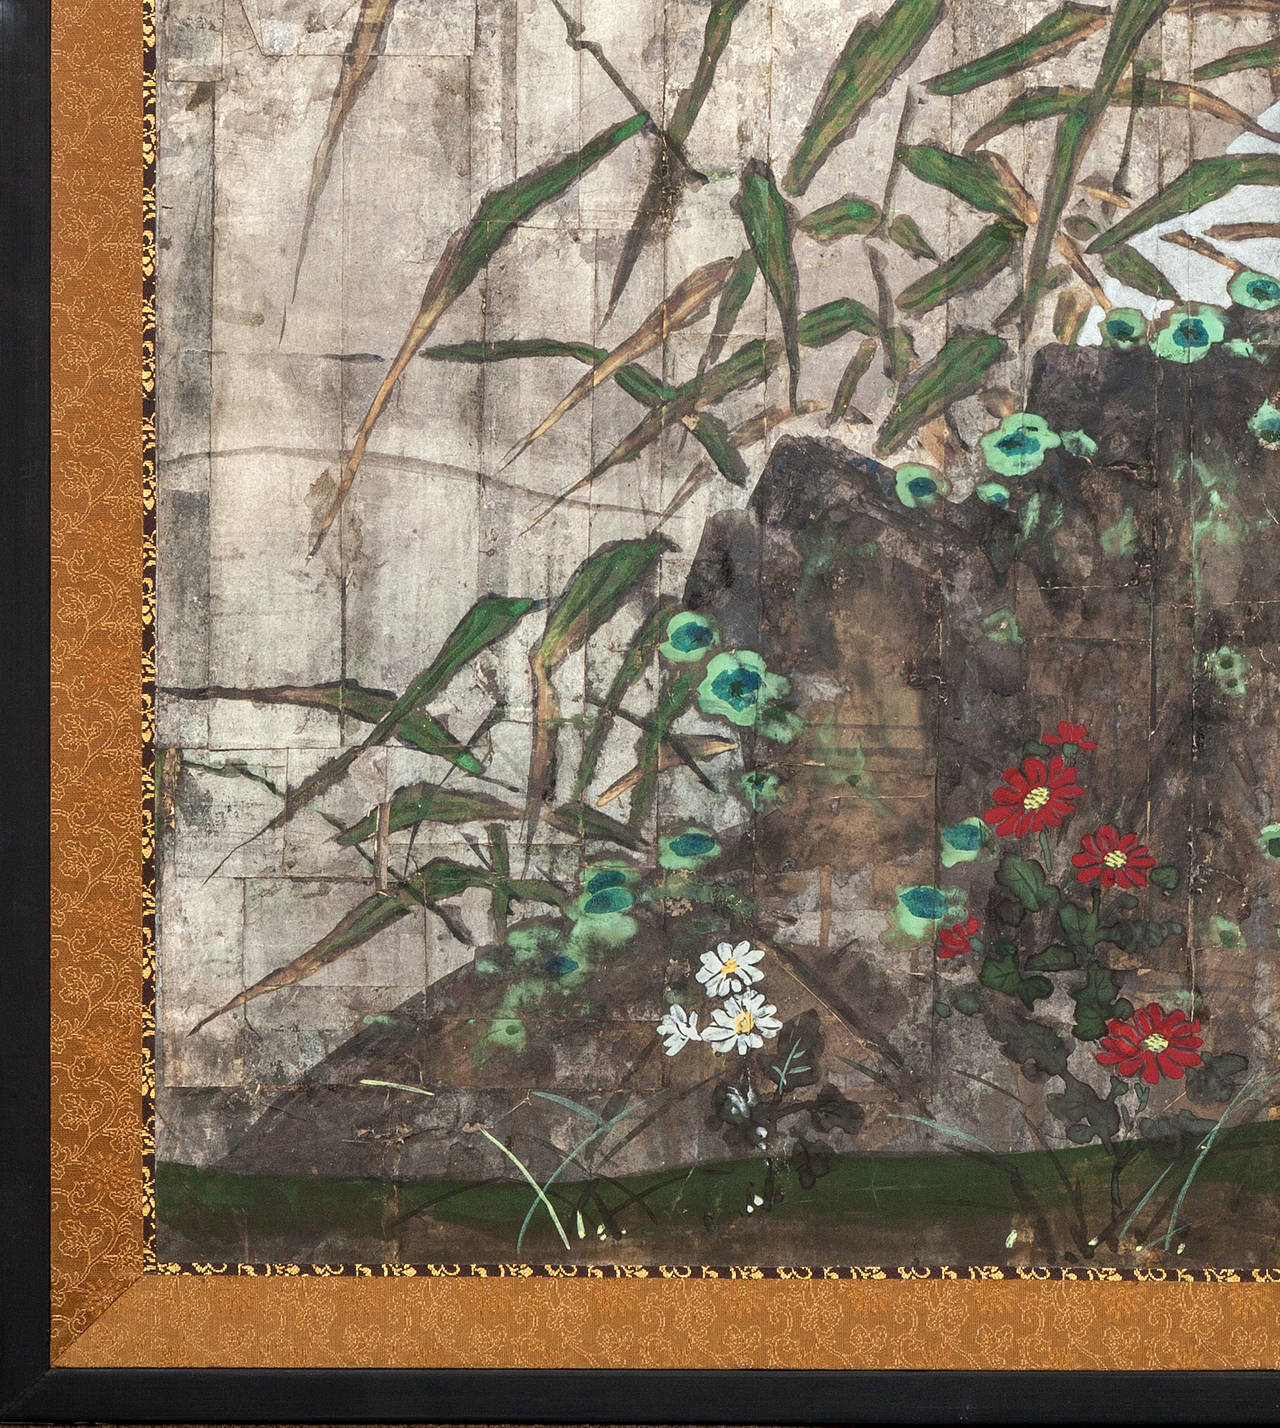 Japanese two panel screen: Moon rising through bamboo on silver leaf, Meiji period painting (1868 - 1912) of the moon rising on the horizon with a garden stone in the foreground. Lichen and small flowers growing on and around the stone. Mineral